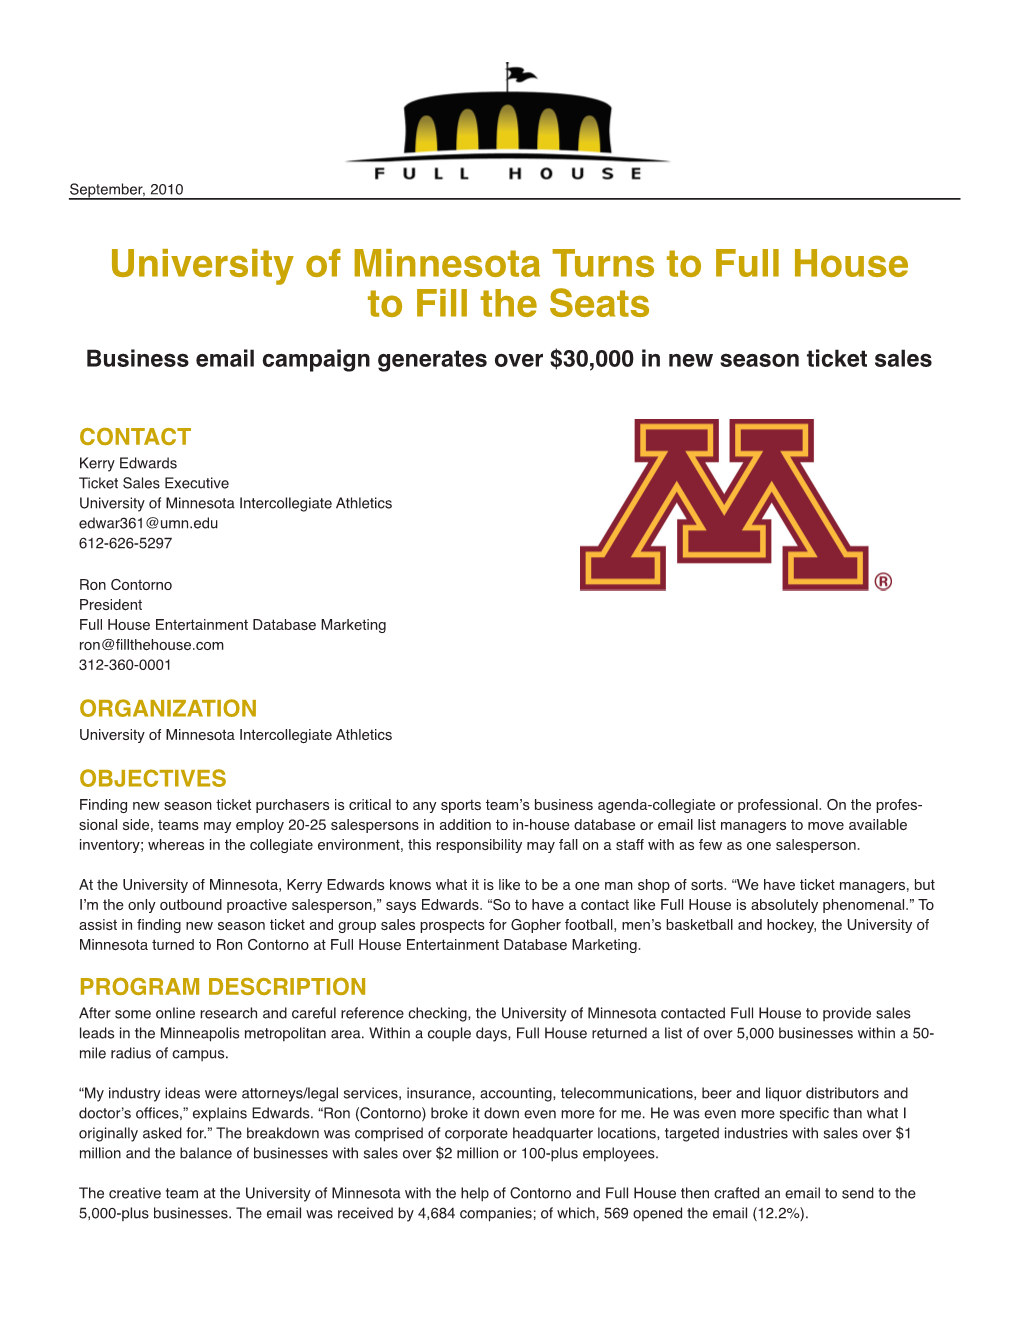 University of Minnesota Turns to Full House to Fill the Seats Business Email Campaign Generates Over $30,000 in New Season Ticket Sales